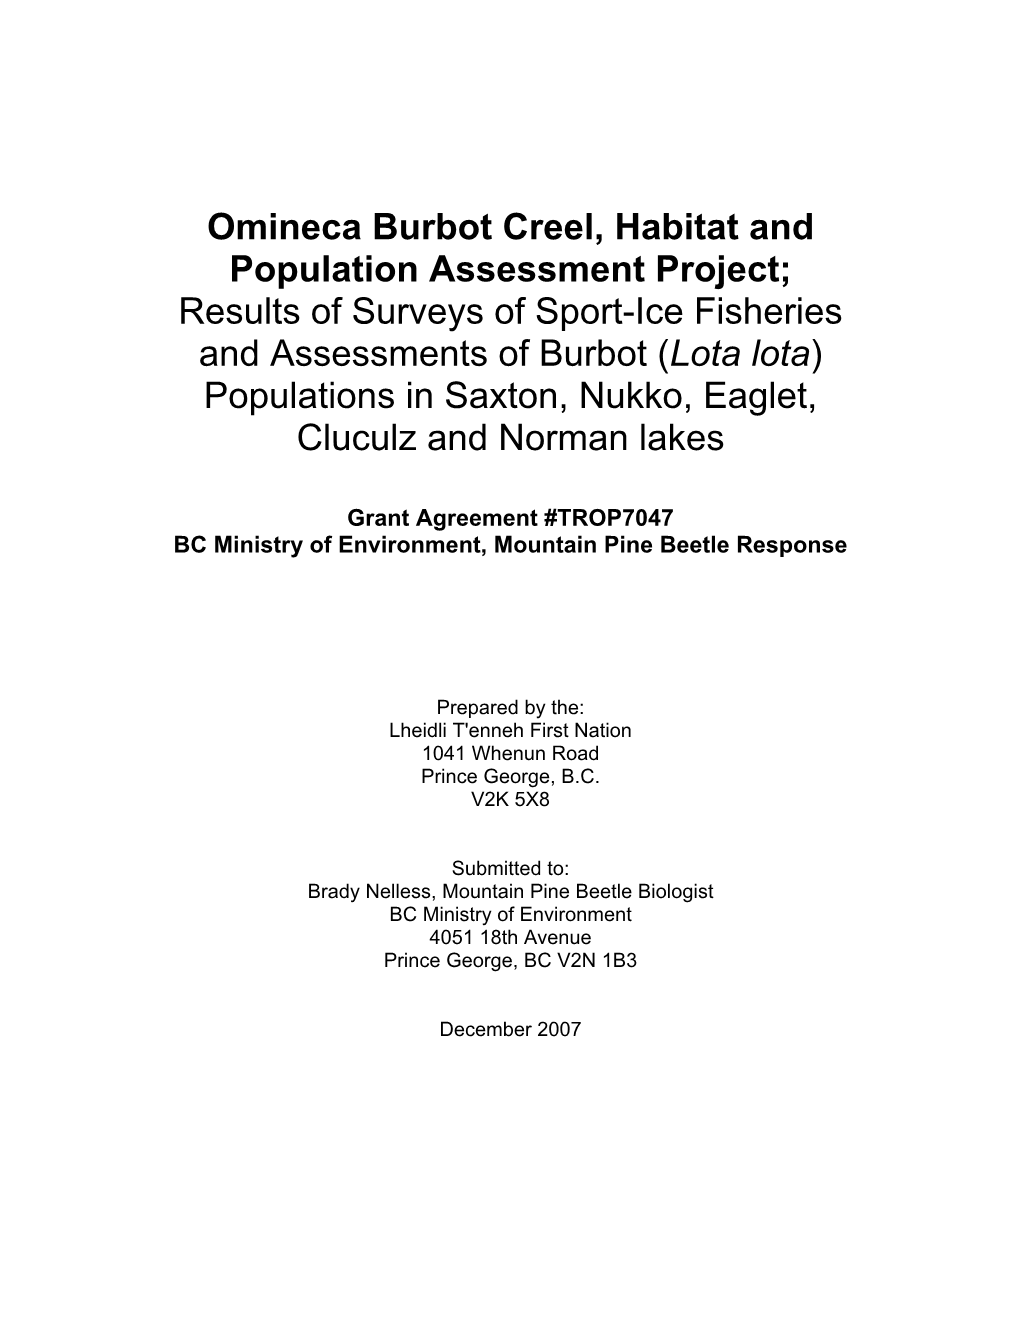 Omineca Burbot Creel, Habitat and Population Assessment Project